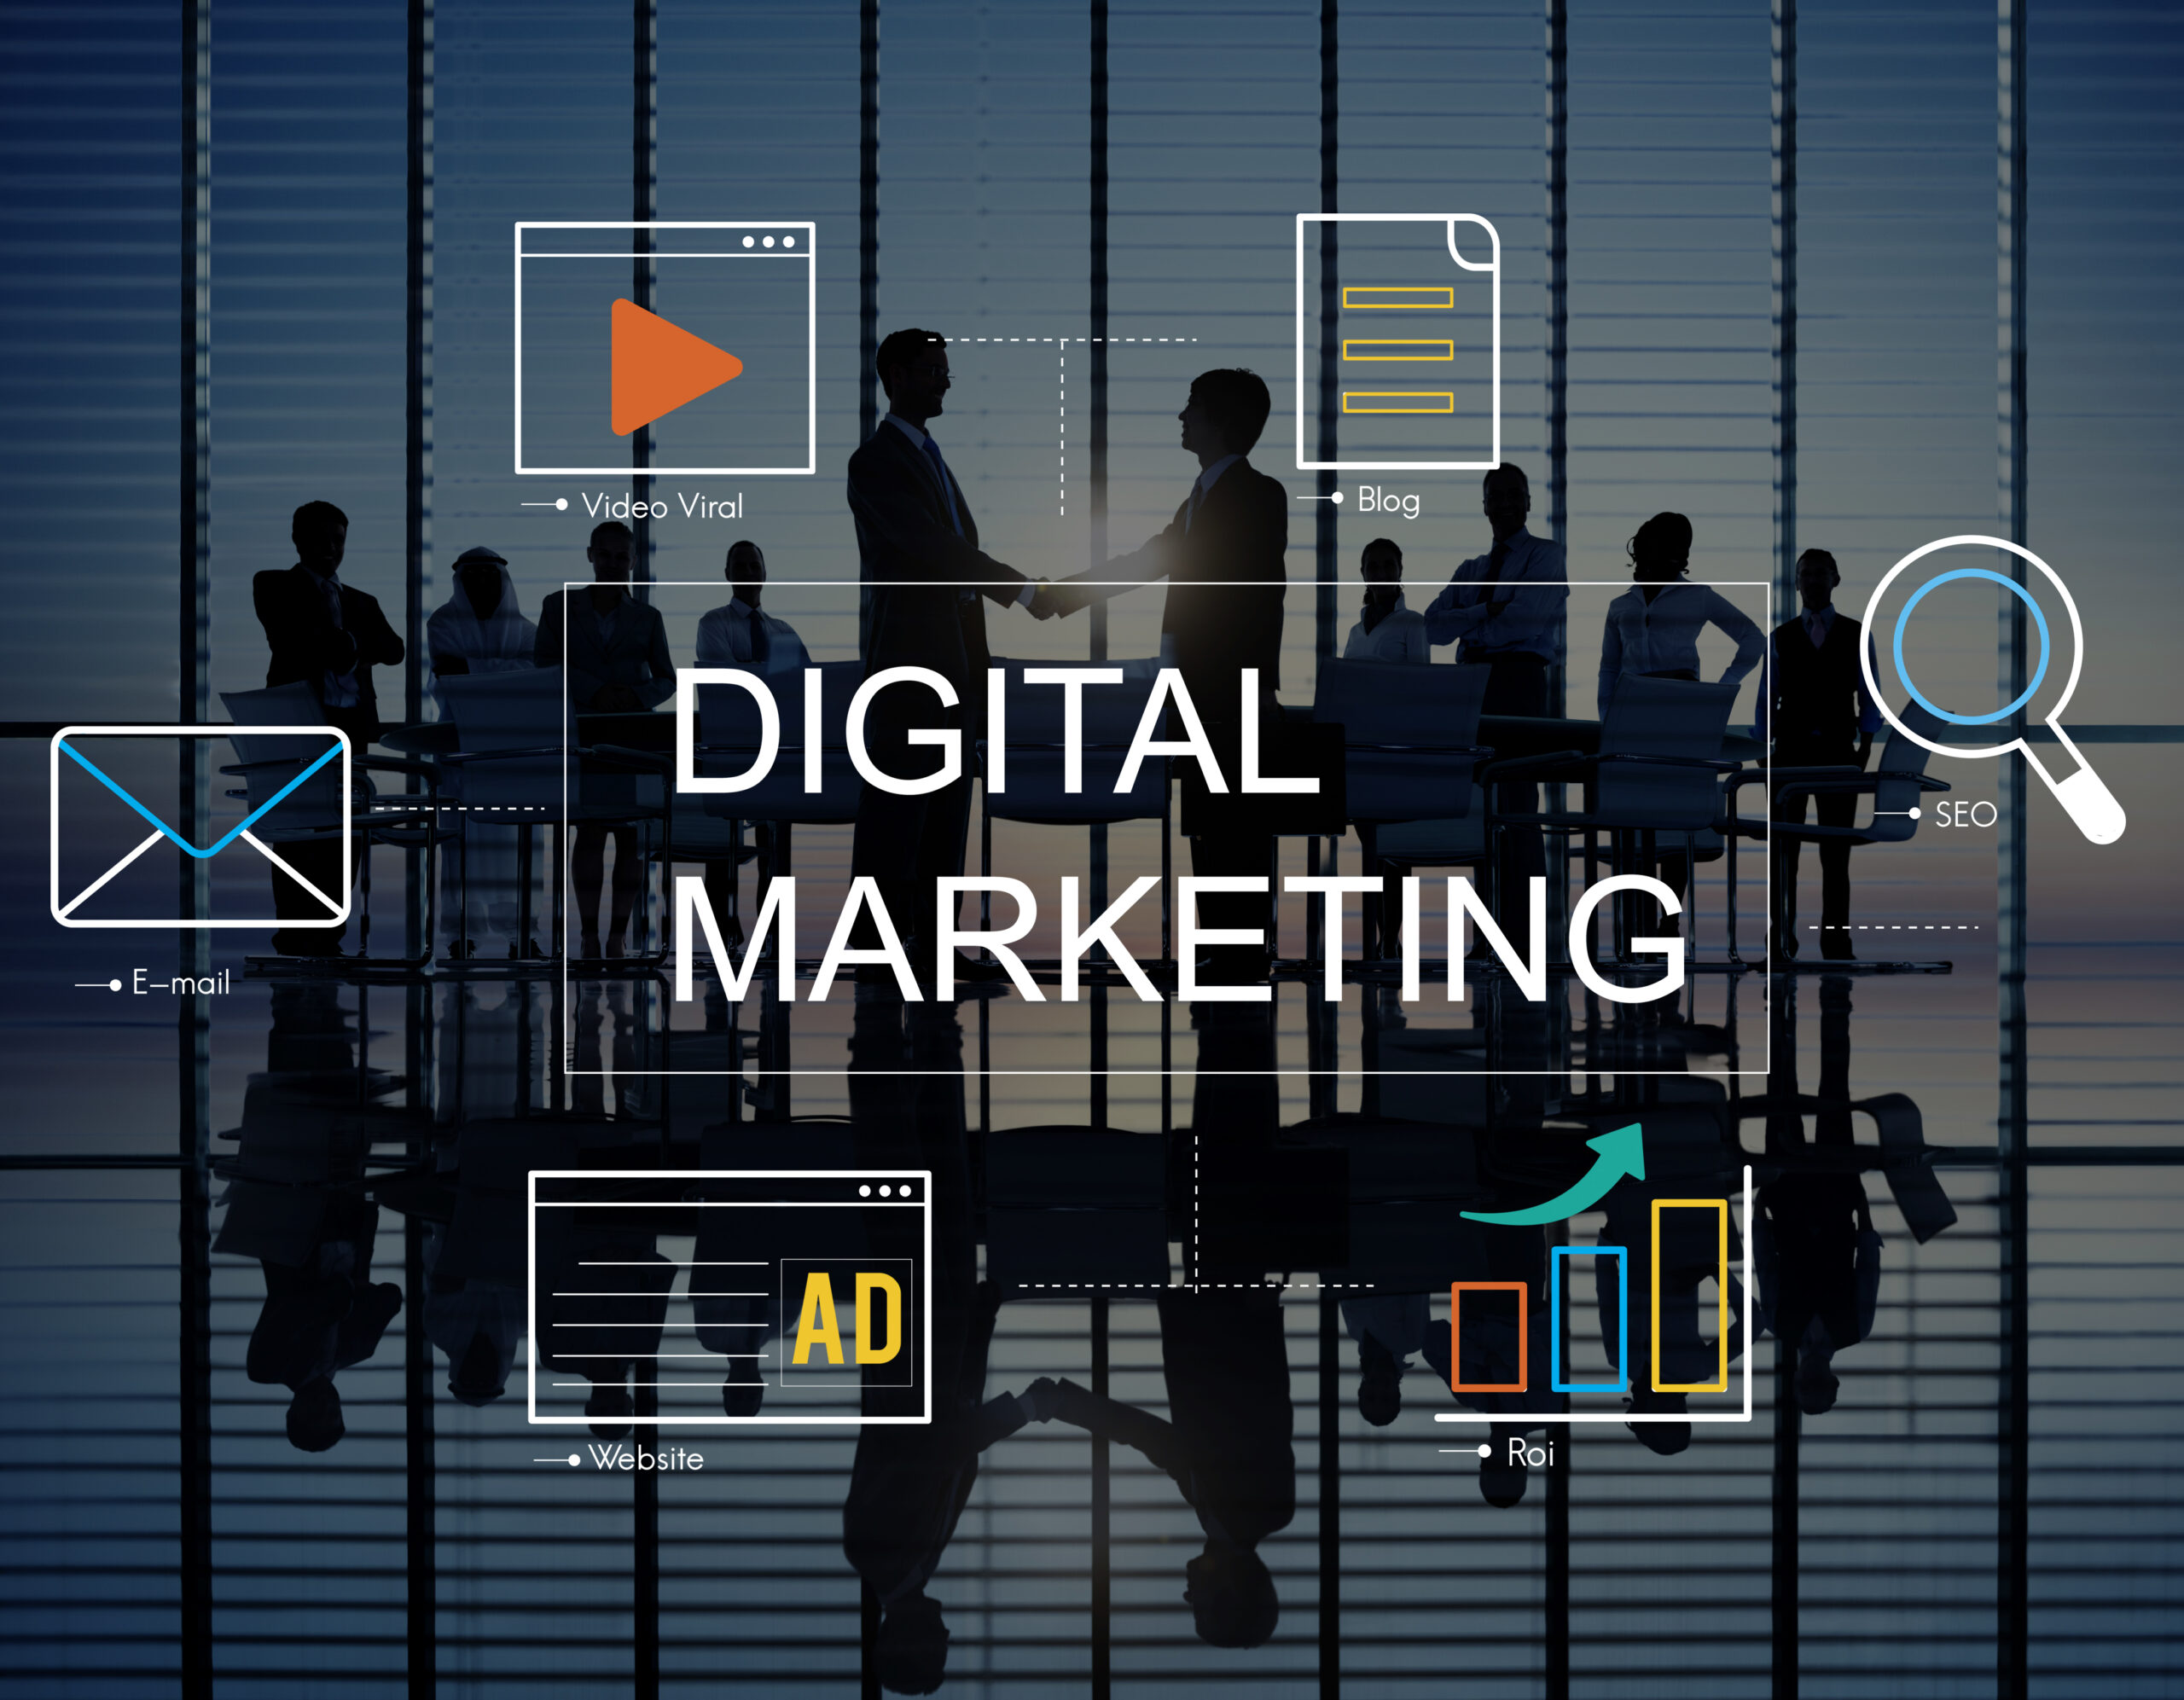 What is the business process in dubai for opening a digital marketing agency'